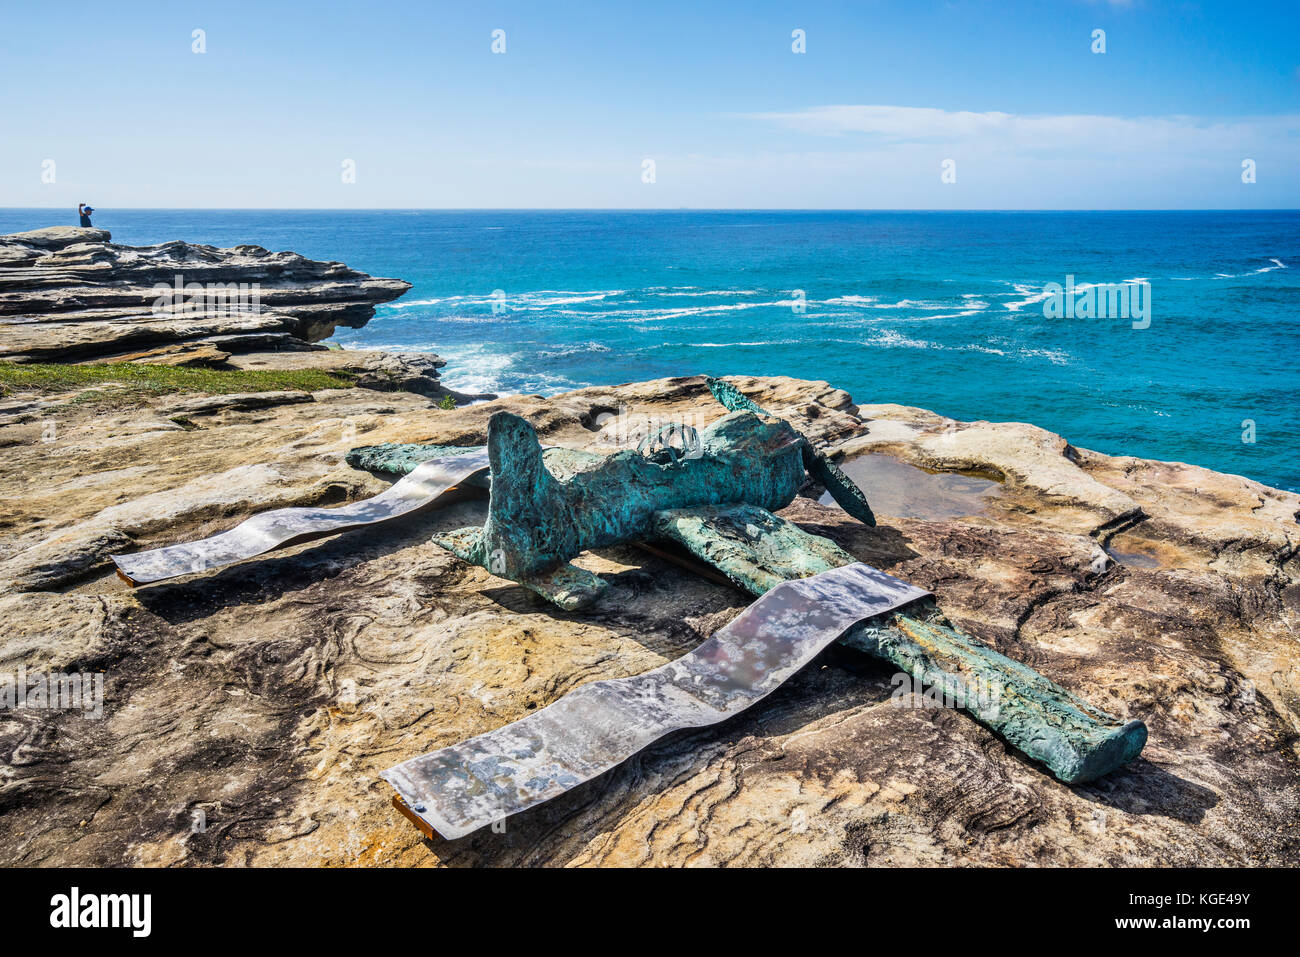 Sculpture by the sea 2017, annual exhibition on the coastal walk between Bondi and Tamara Beach, Sydney, New South Wales, Australia. Sculpture titled  Stock Photo